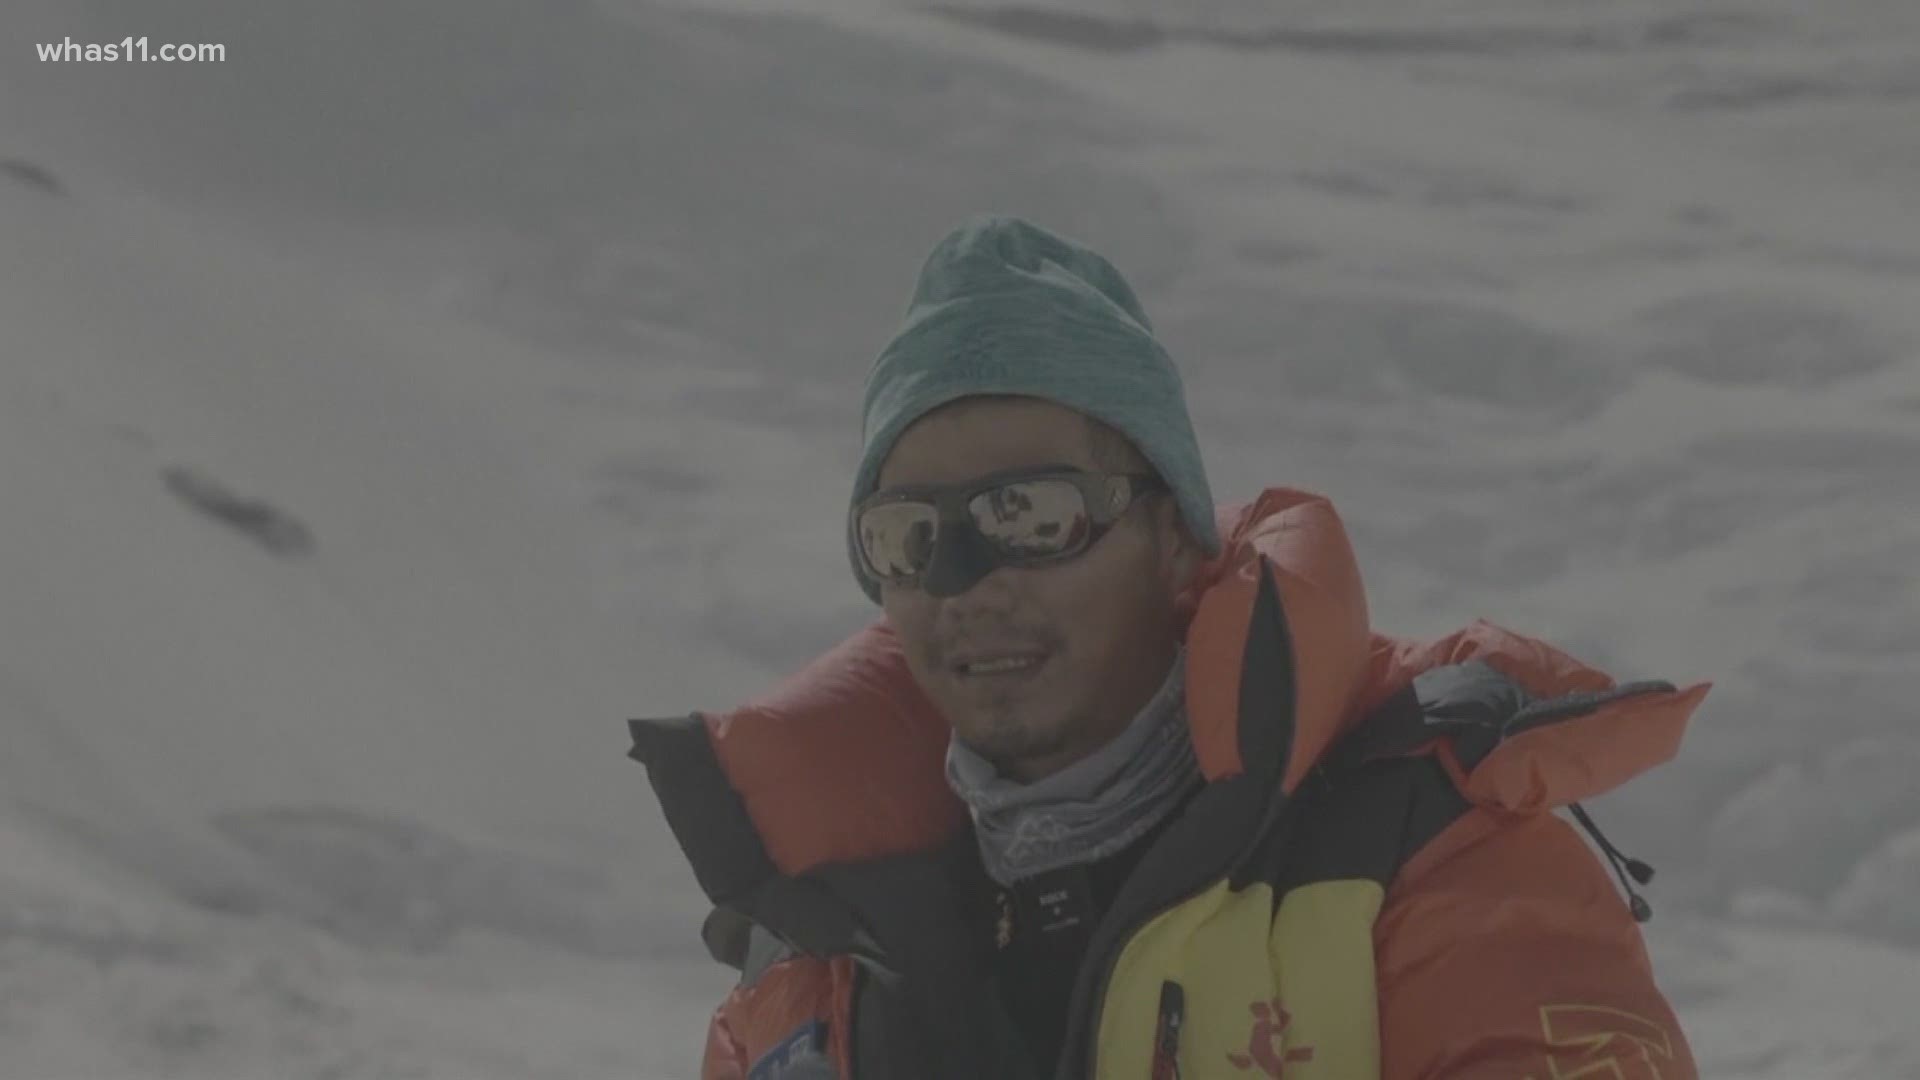 Zhang Hong, 44, is also the third blind climber internationally to reach the world's highest peak.